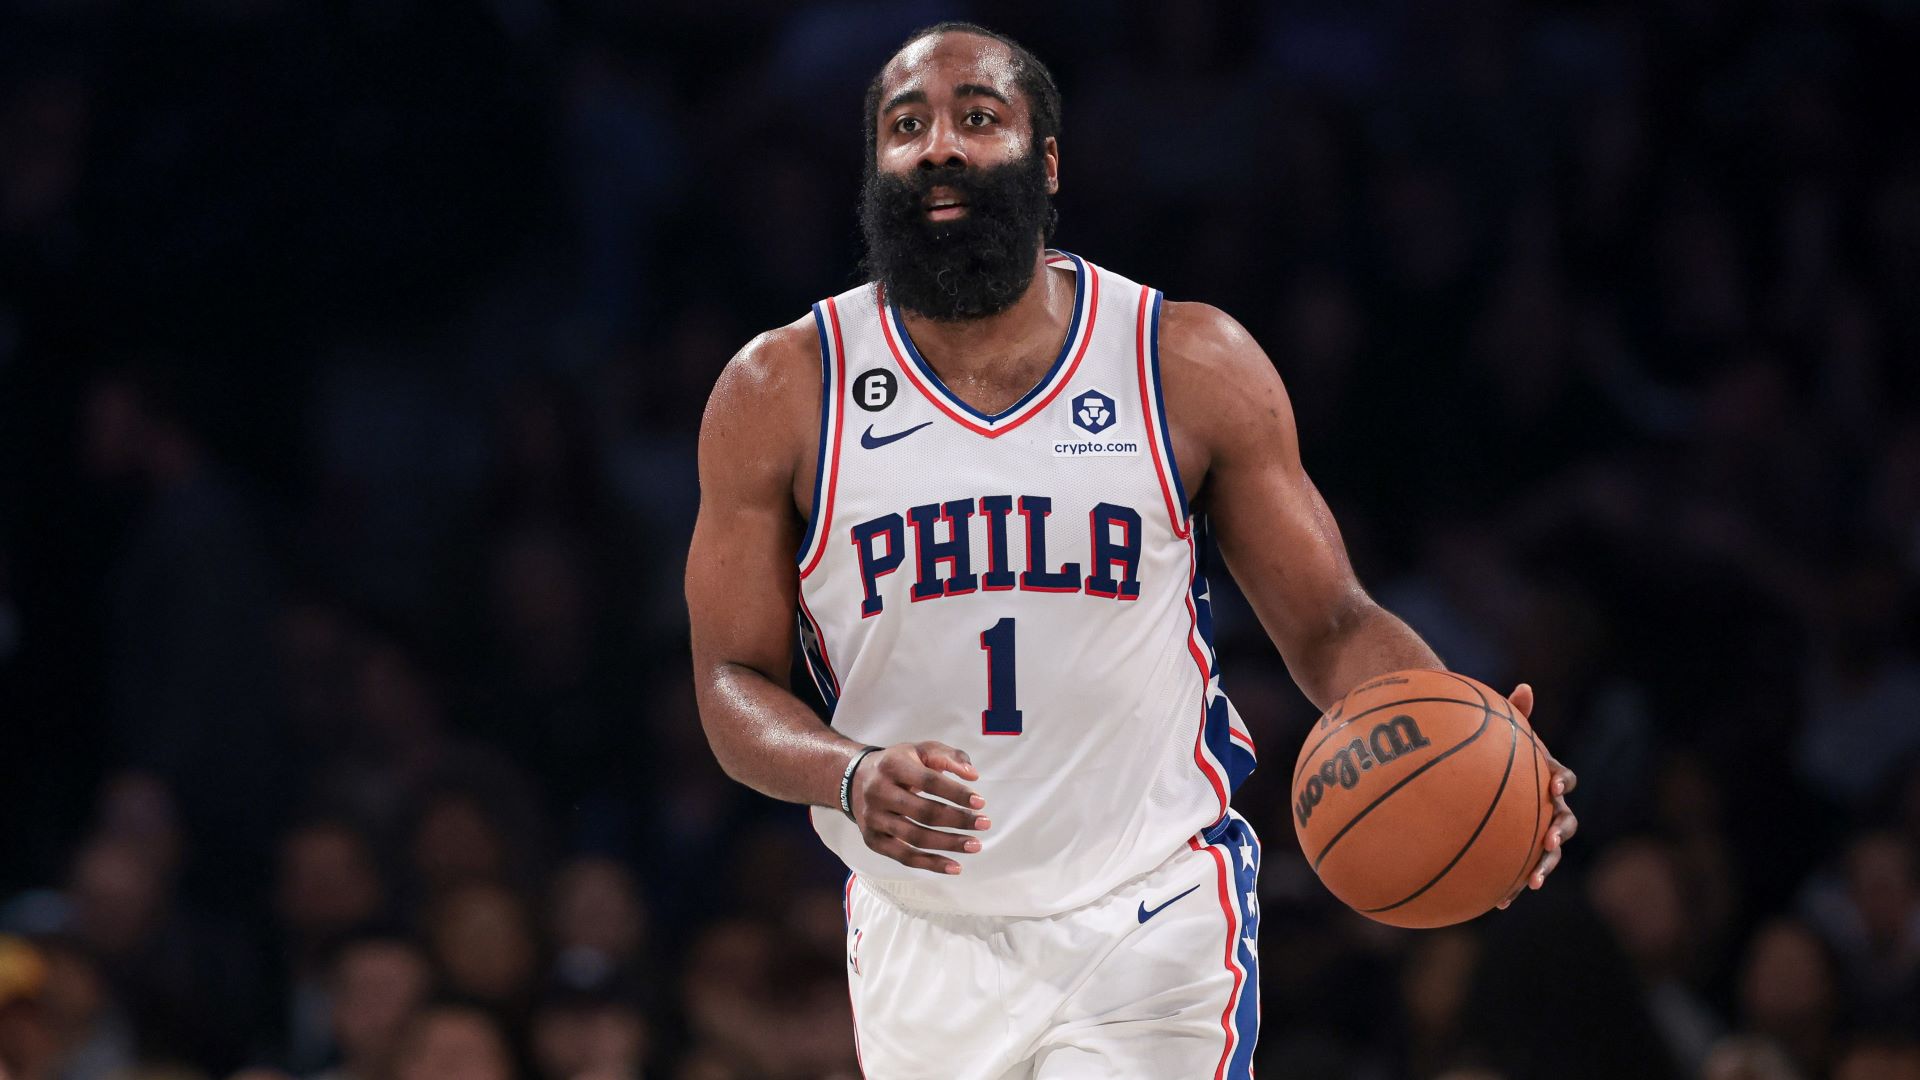 Are James Harden's Outfits the Key to the Sixers' Success? - Crossing Broad